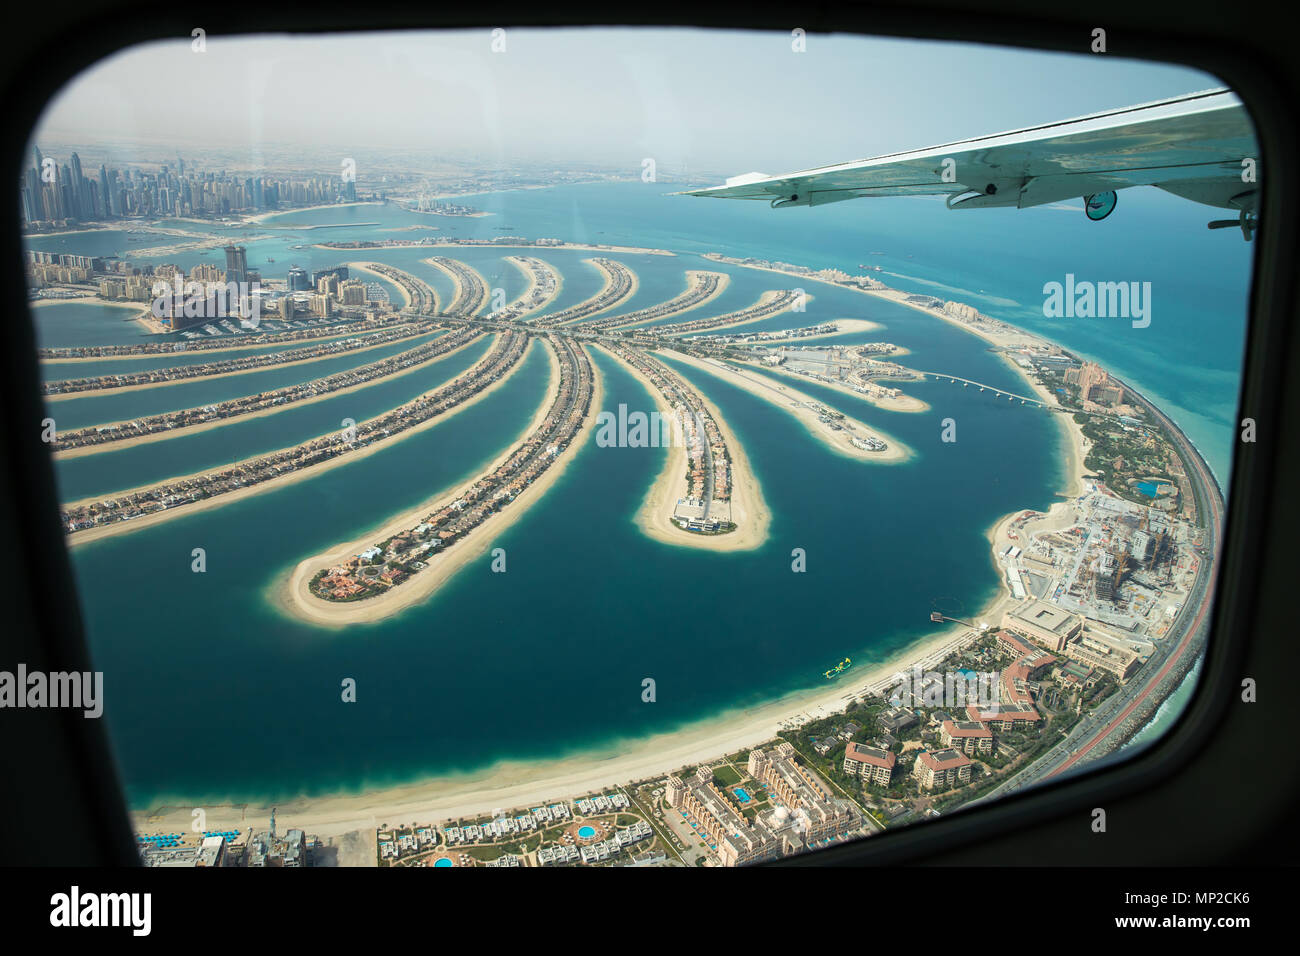 Aerial view of Palm Jumeirah man made island and Dubai Marina and JBR district on a sunny day. as viewed from a plane window Dubai, UAE. Stock Photo